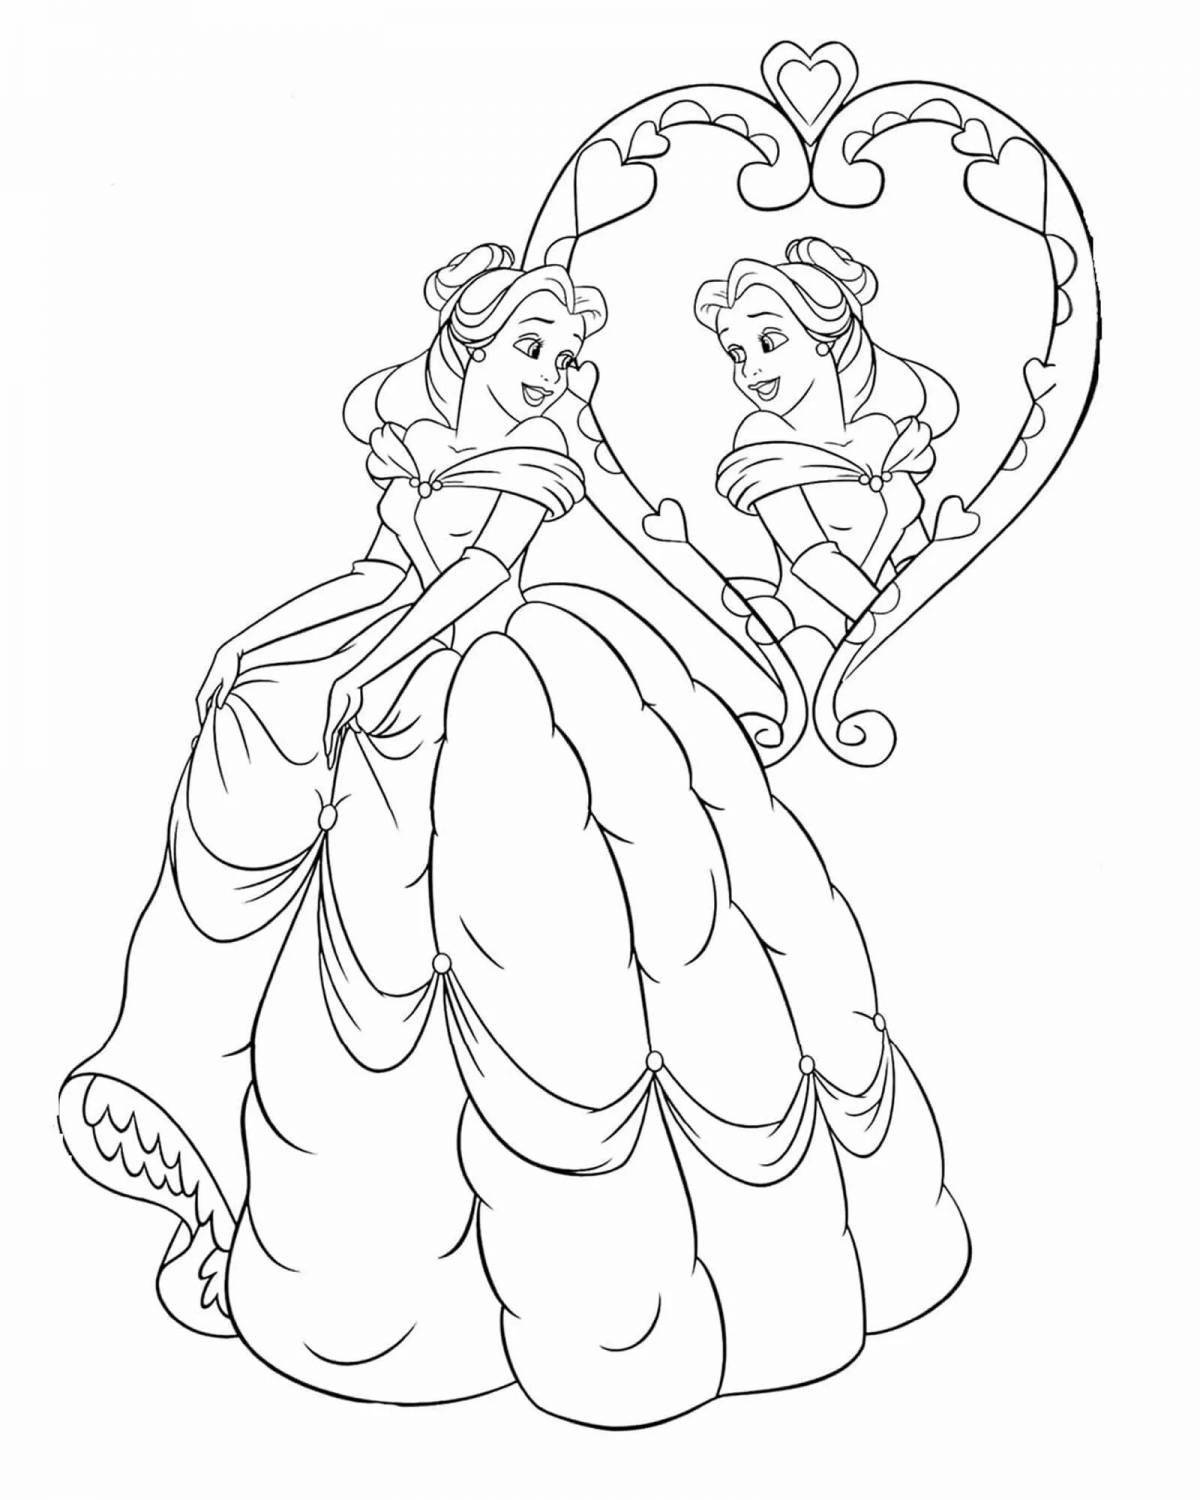 Brilliant belle and monster coloring page